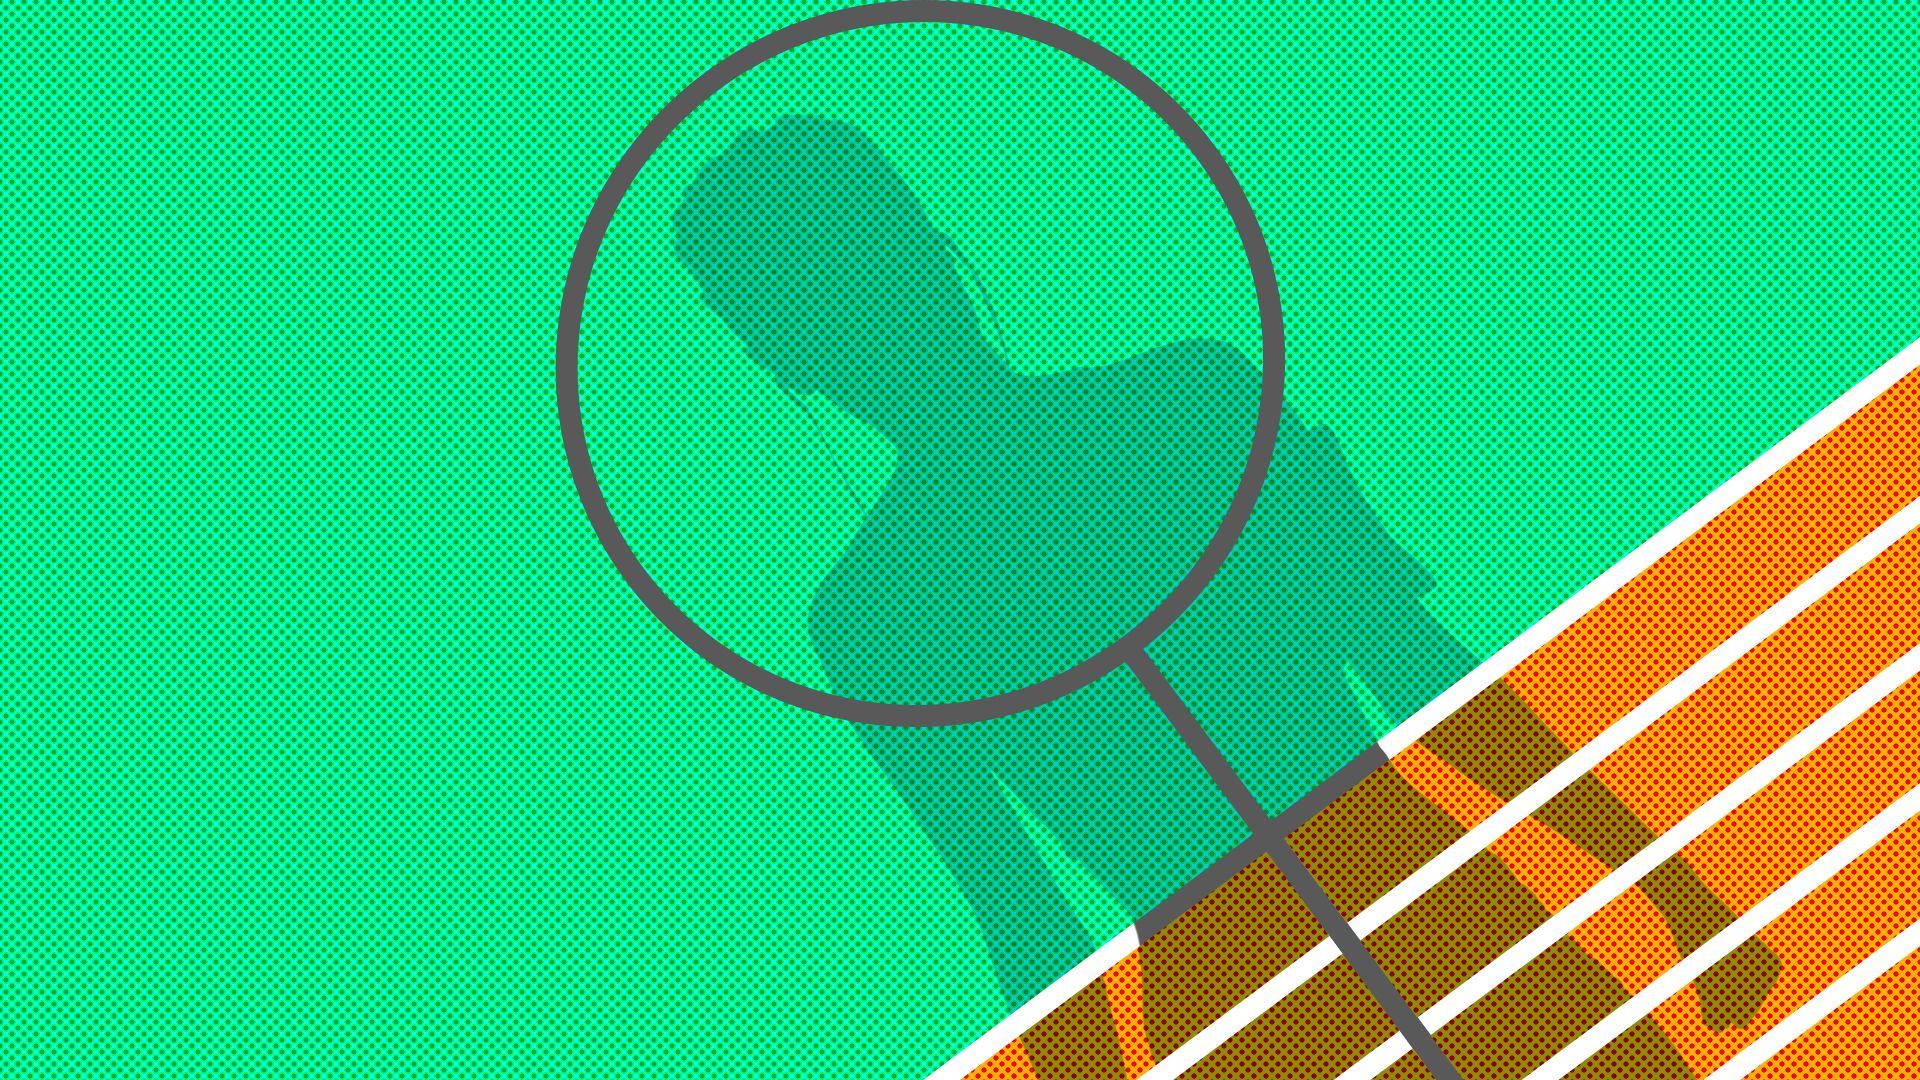 Illustration of a track with a shadow of a woman being cast in the shape of the female symbol